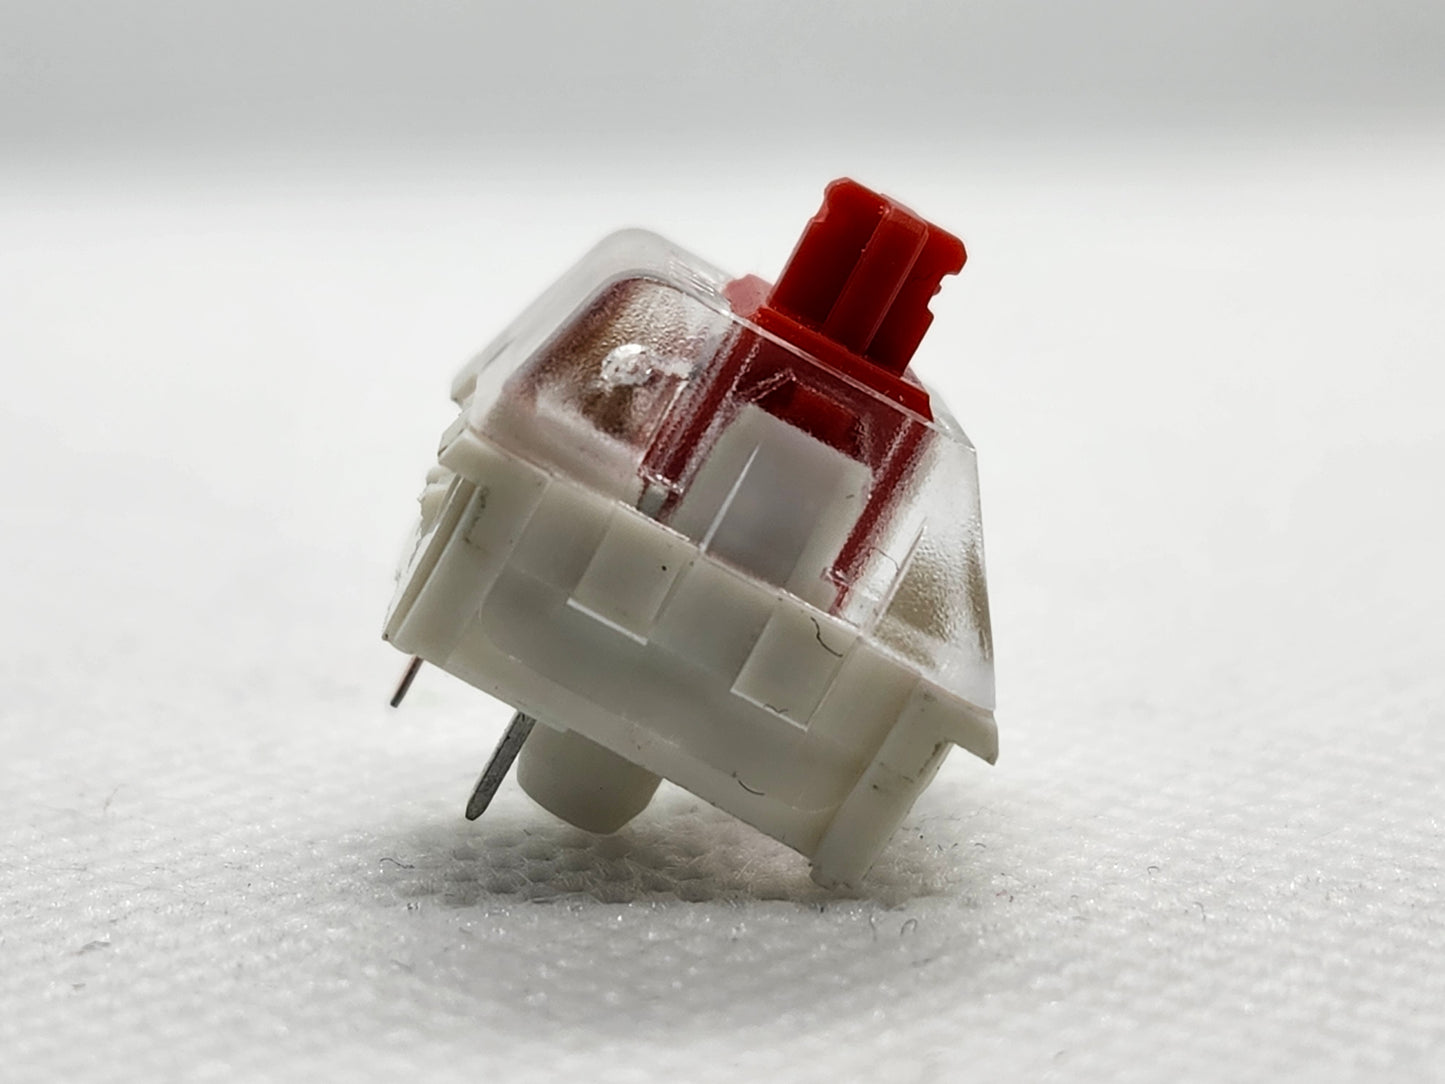 Kailh Red Ring